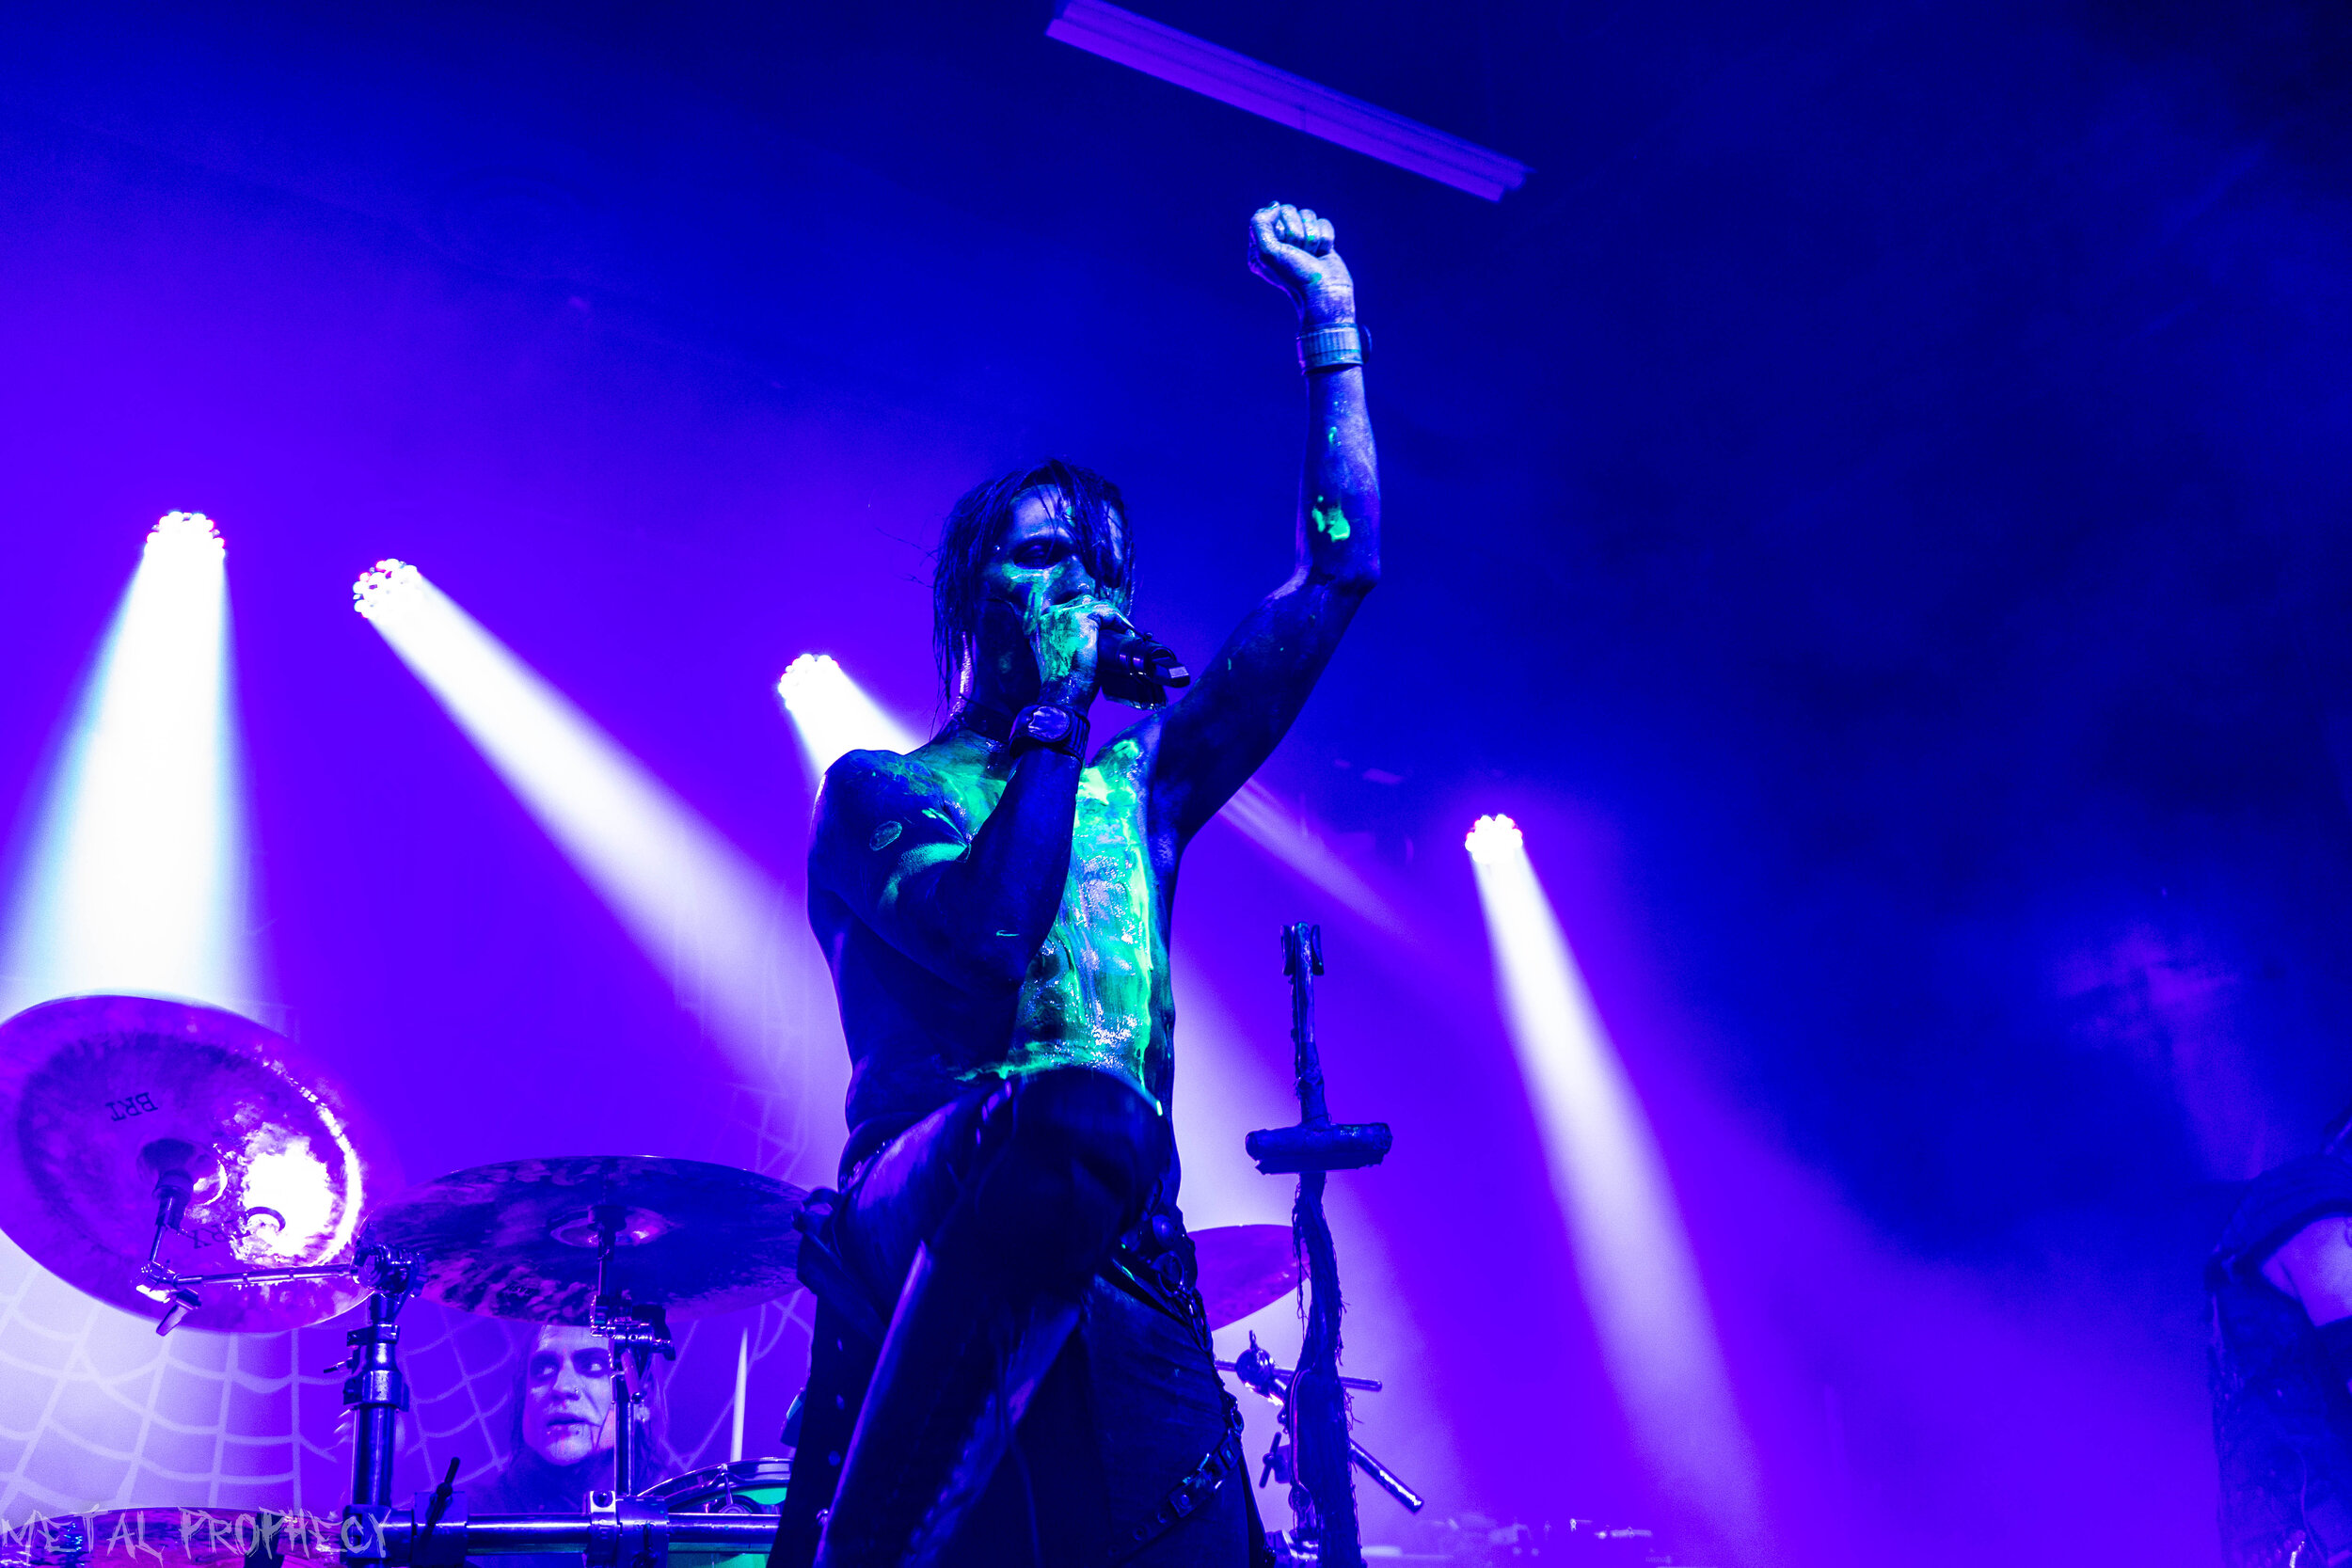 Wednesday 13 at The Masquerade (Hell)